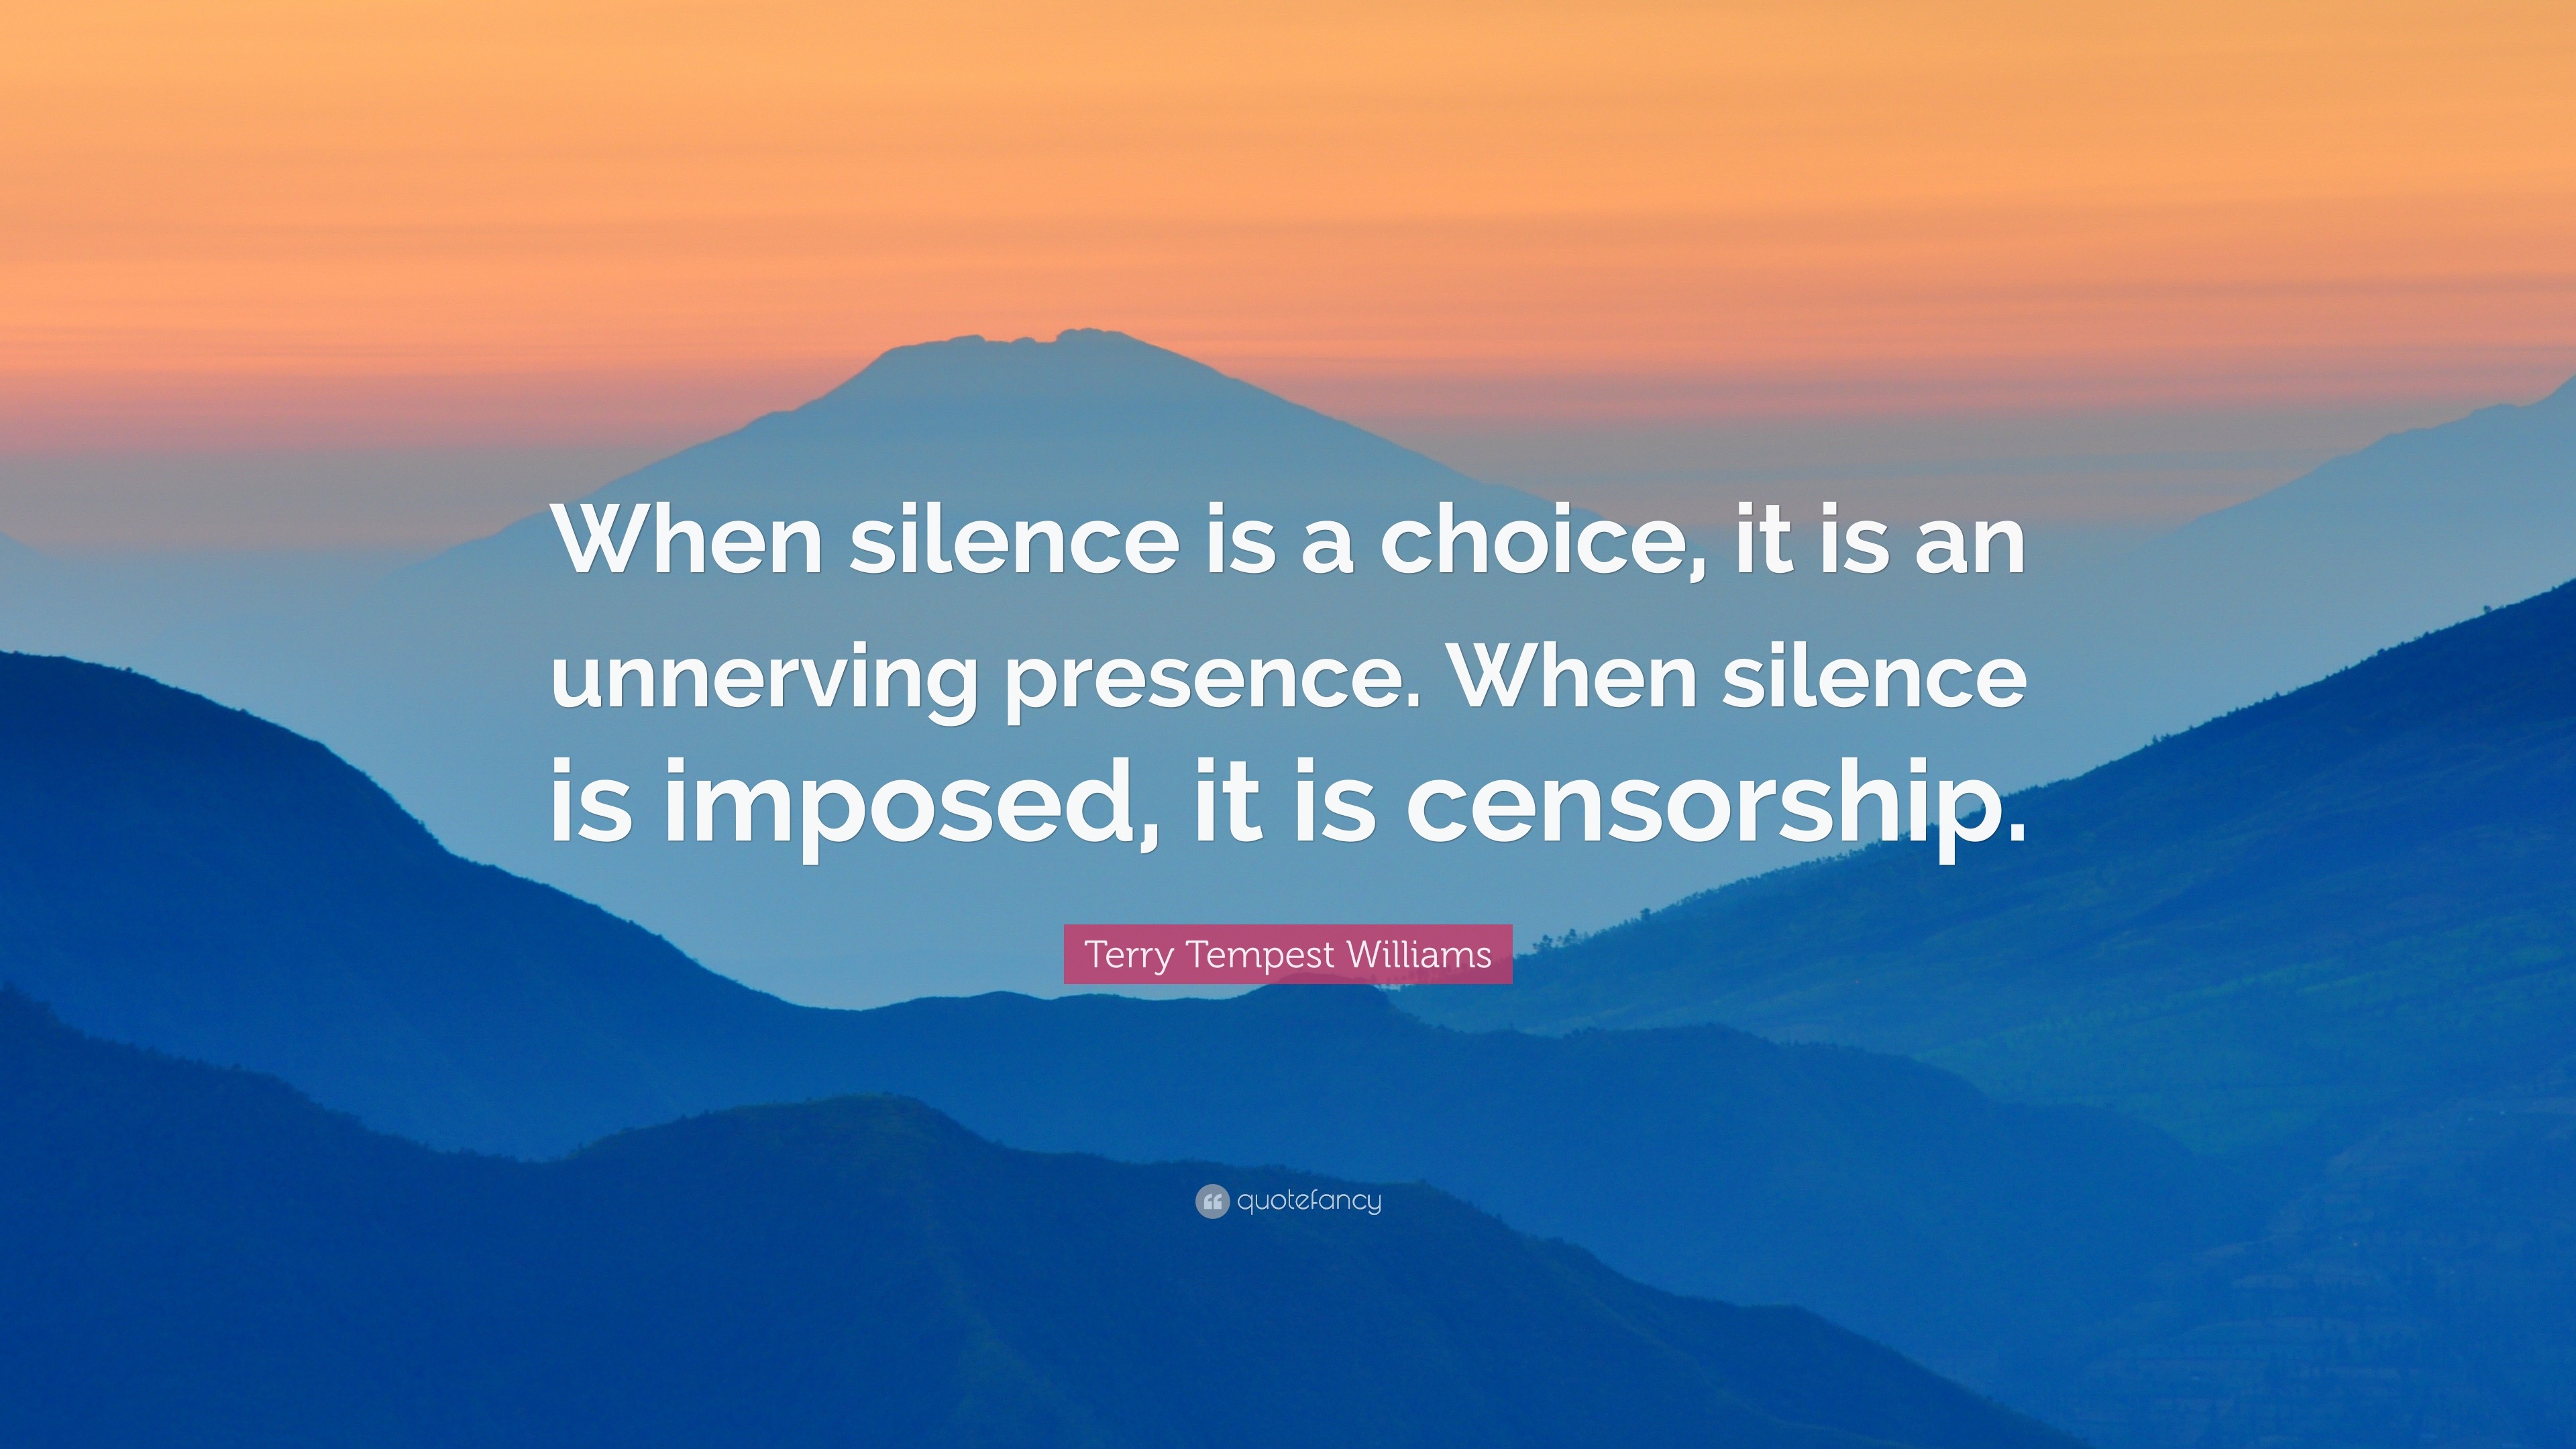 Terry Tempest Williams Quote When Silence Is A Choice It Is An Unnerving Presence When Silence Is Imposed It Is Censorship 7 Wallpapers Quotefancy